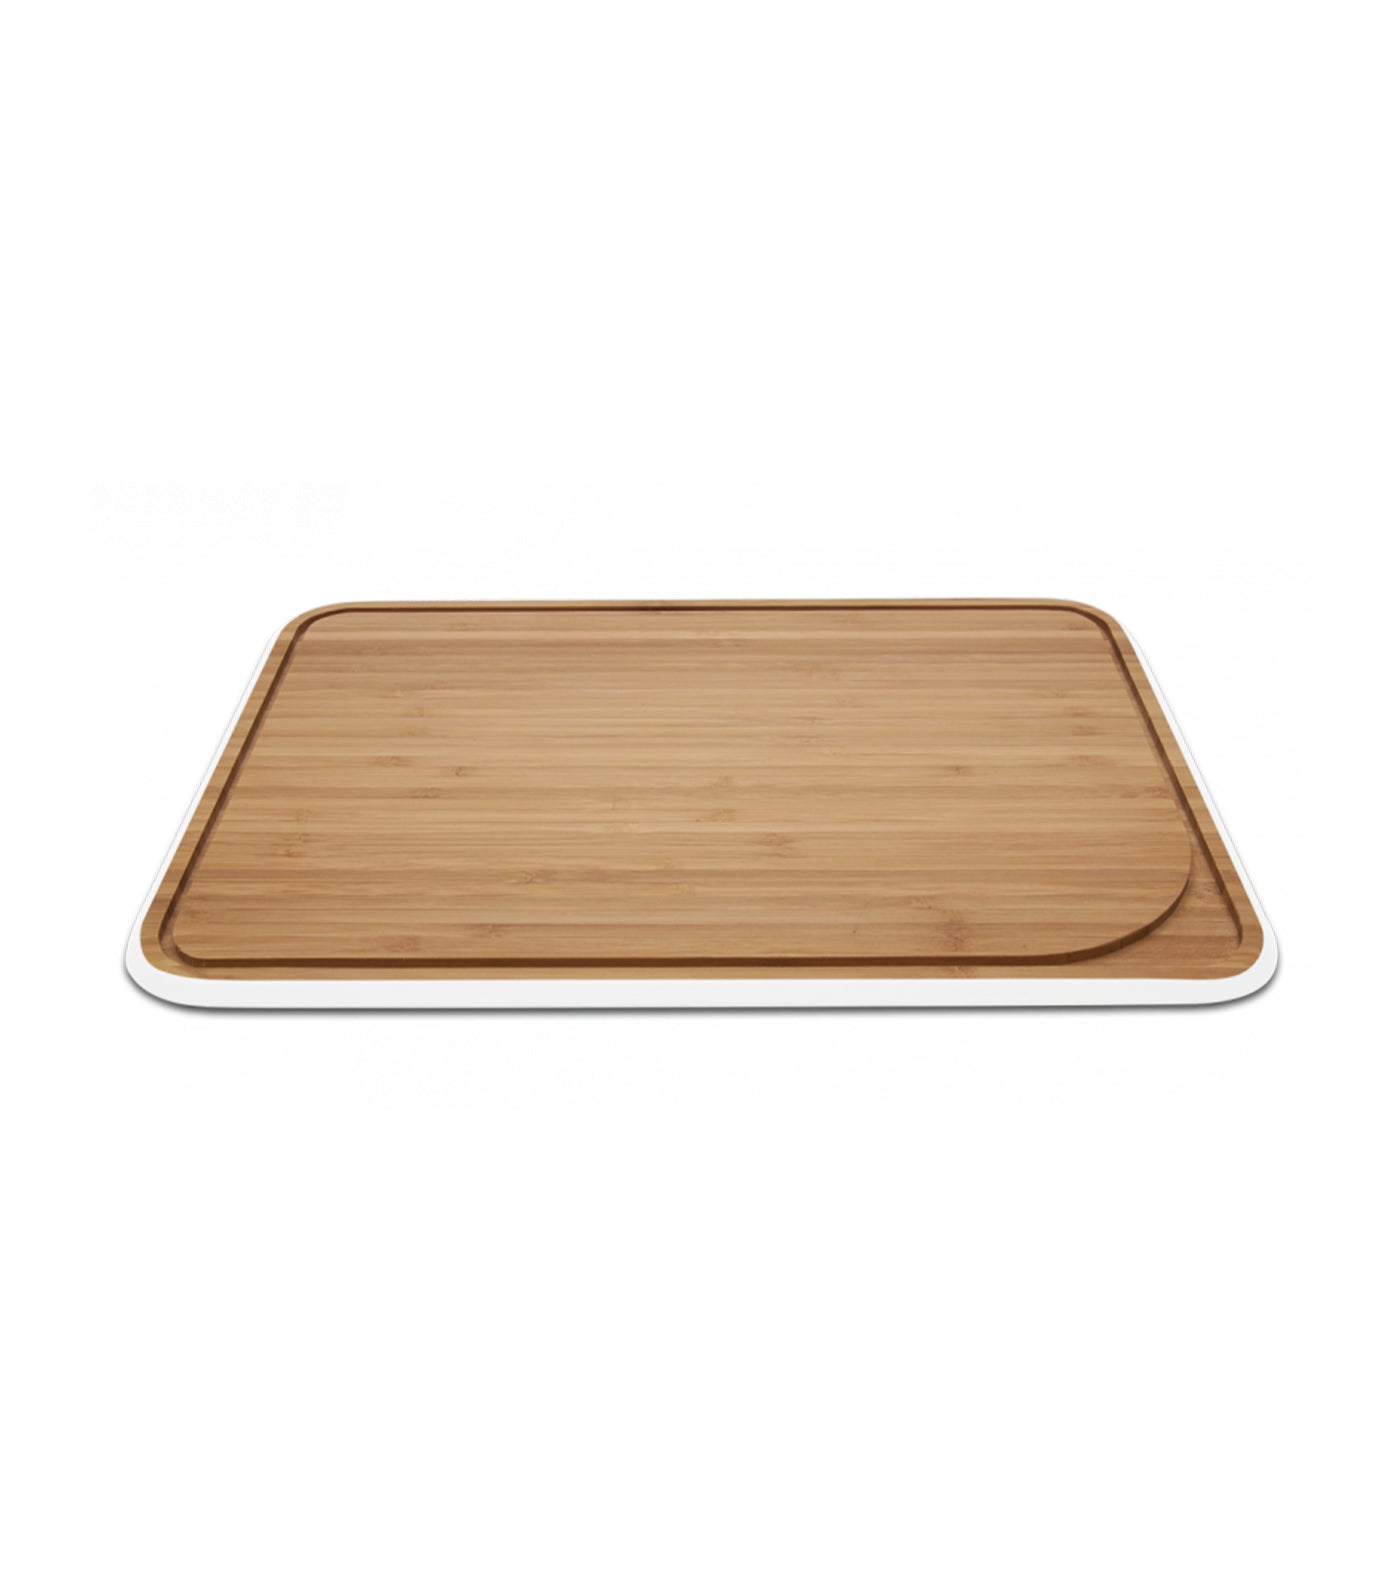 Pebbly Cutting Board with White Rim - M